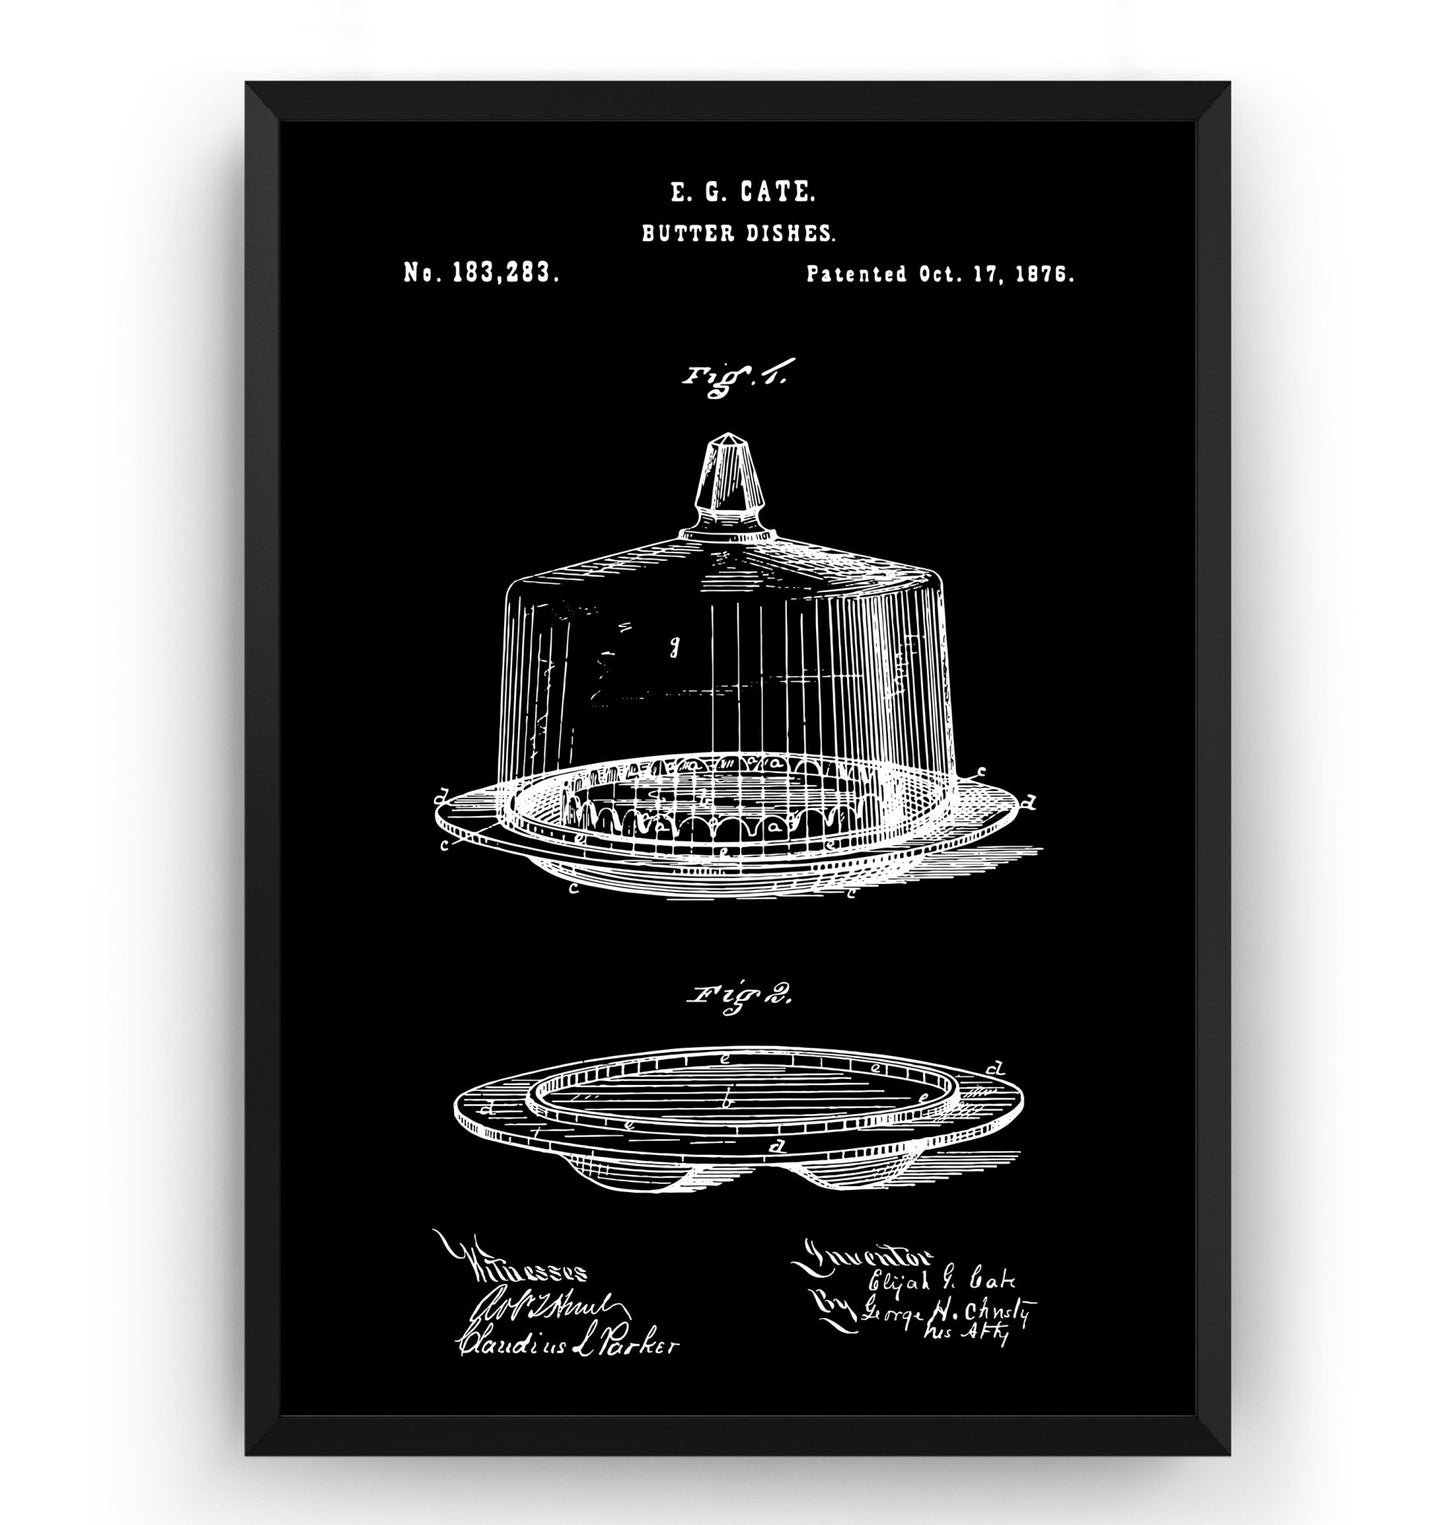 Butter Dish 1876 Patent Print - Magic Posters